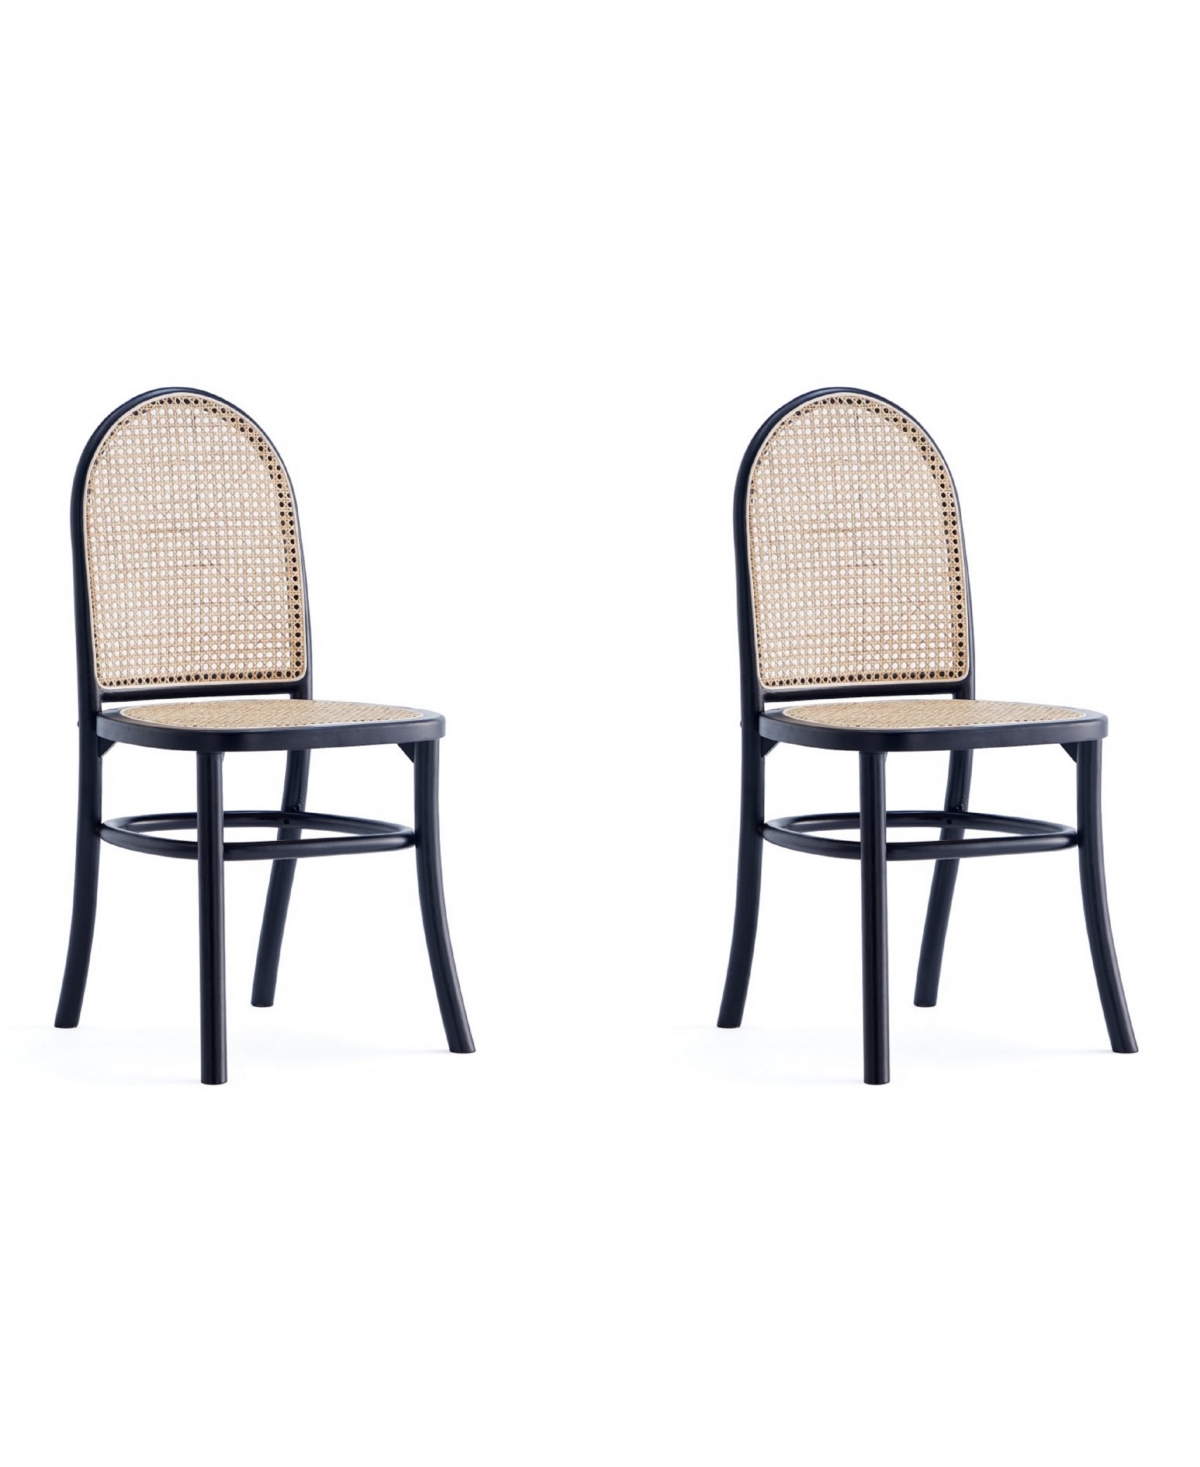 Manhattan Comfort Paragon 2-piece Ash Wood And Natural Cane Dining Chair In Black And Natural Cane